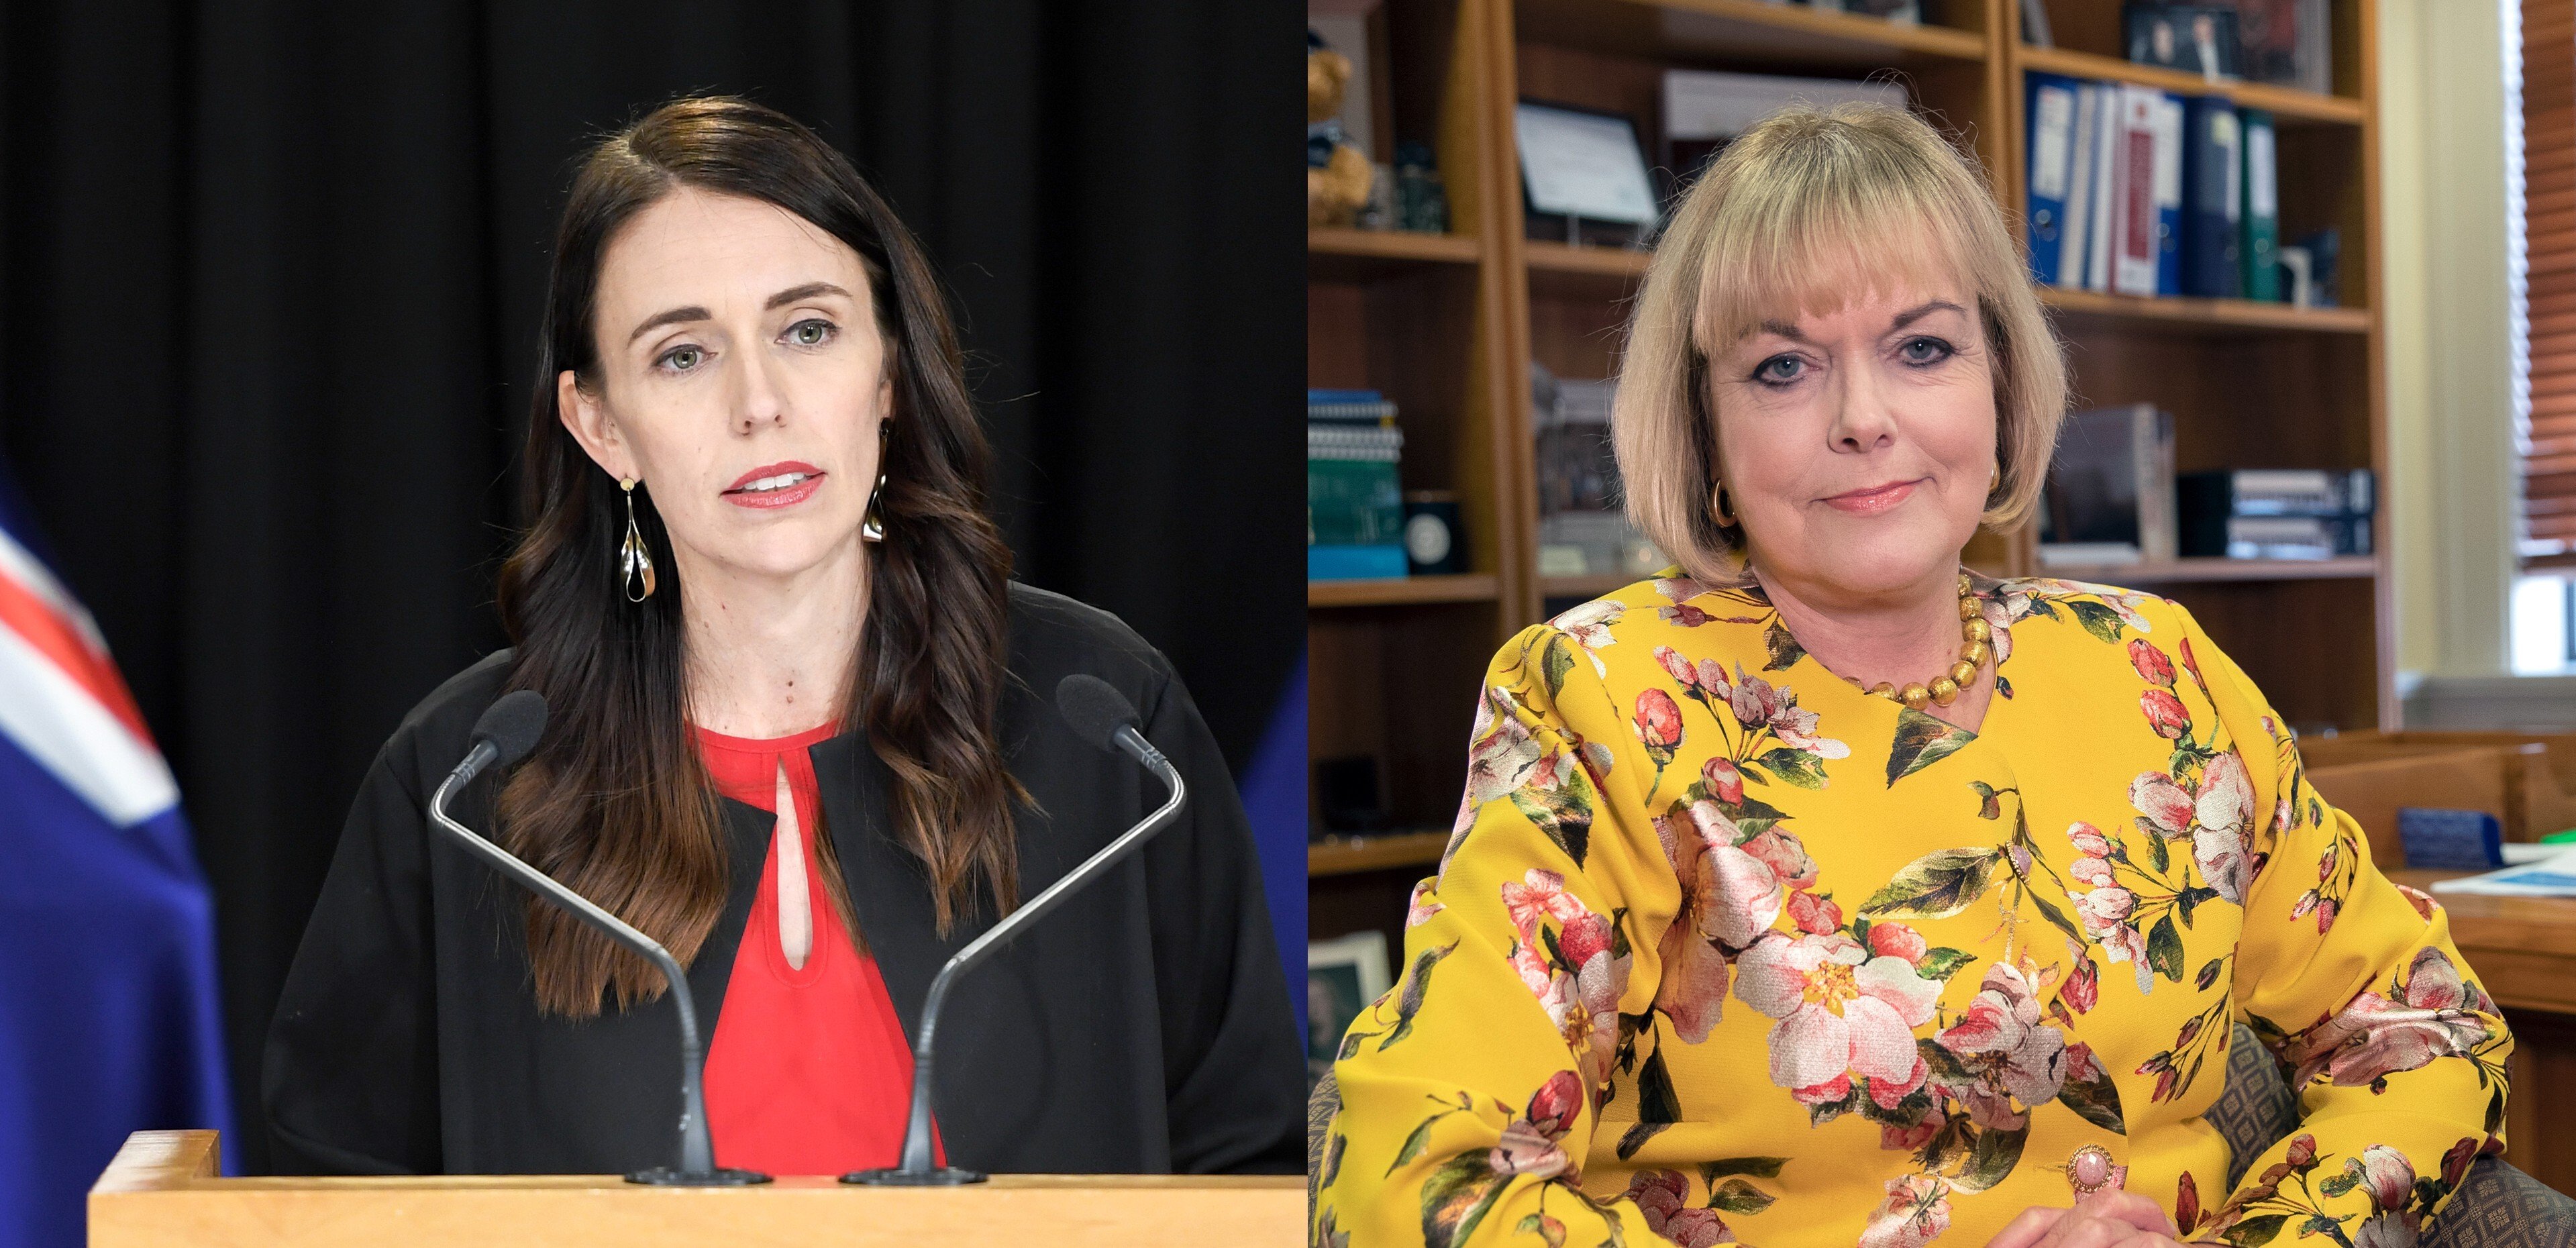 New Zealand Prime Minister Jacinda Ardern, left, and leader of National Party Judith Collins. Photos: NZ Herald, Xinhua